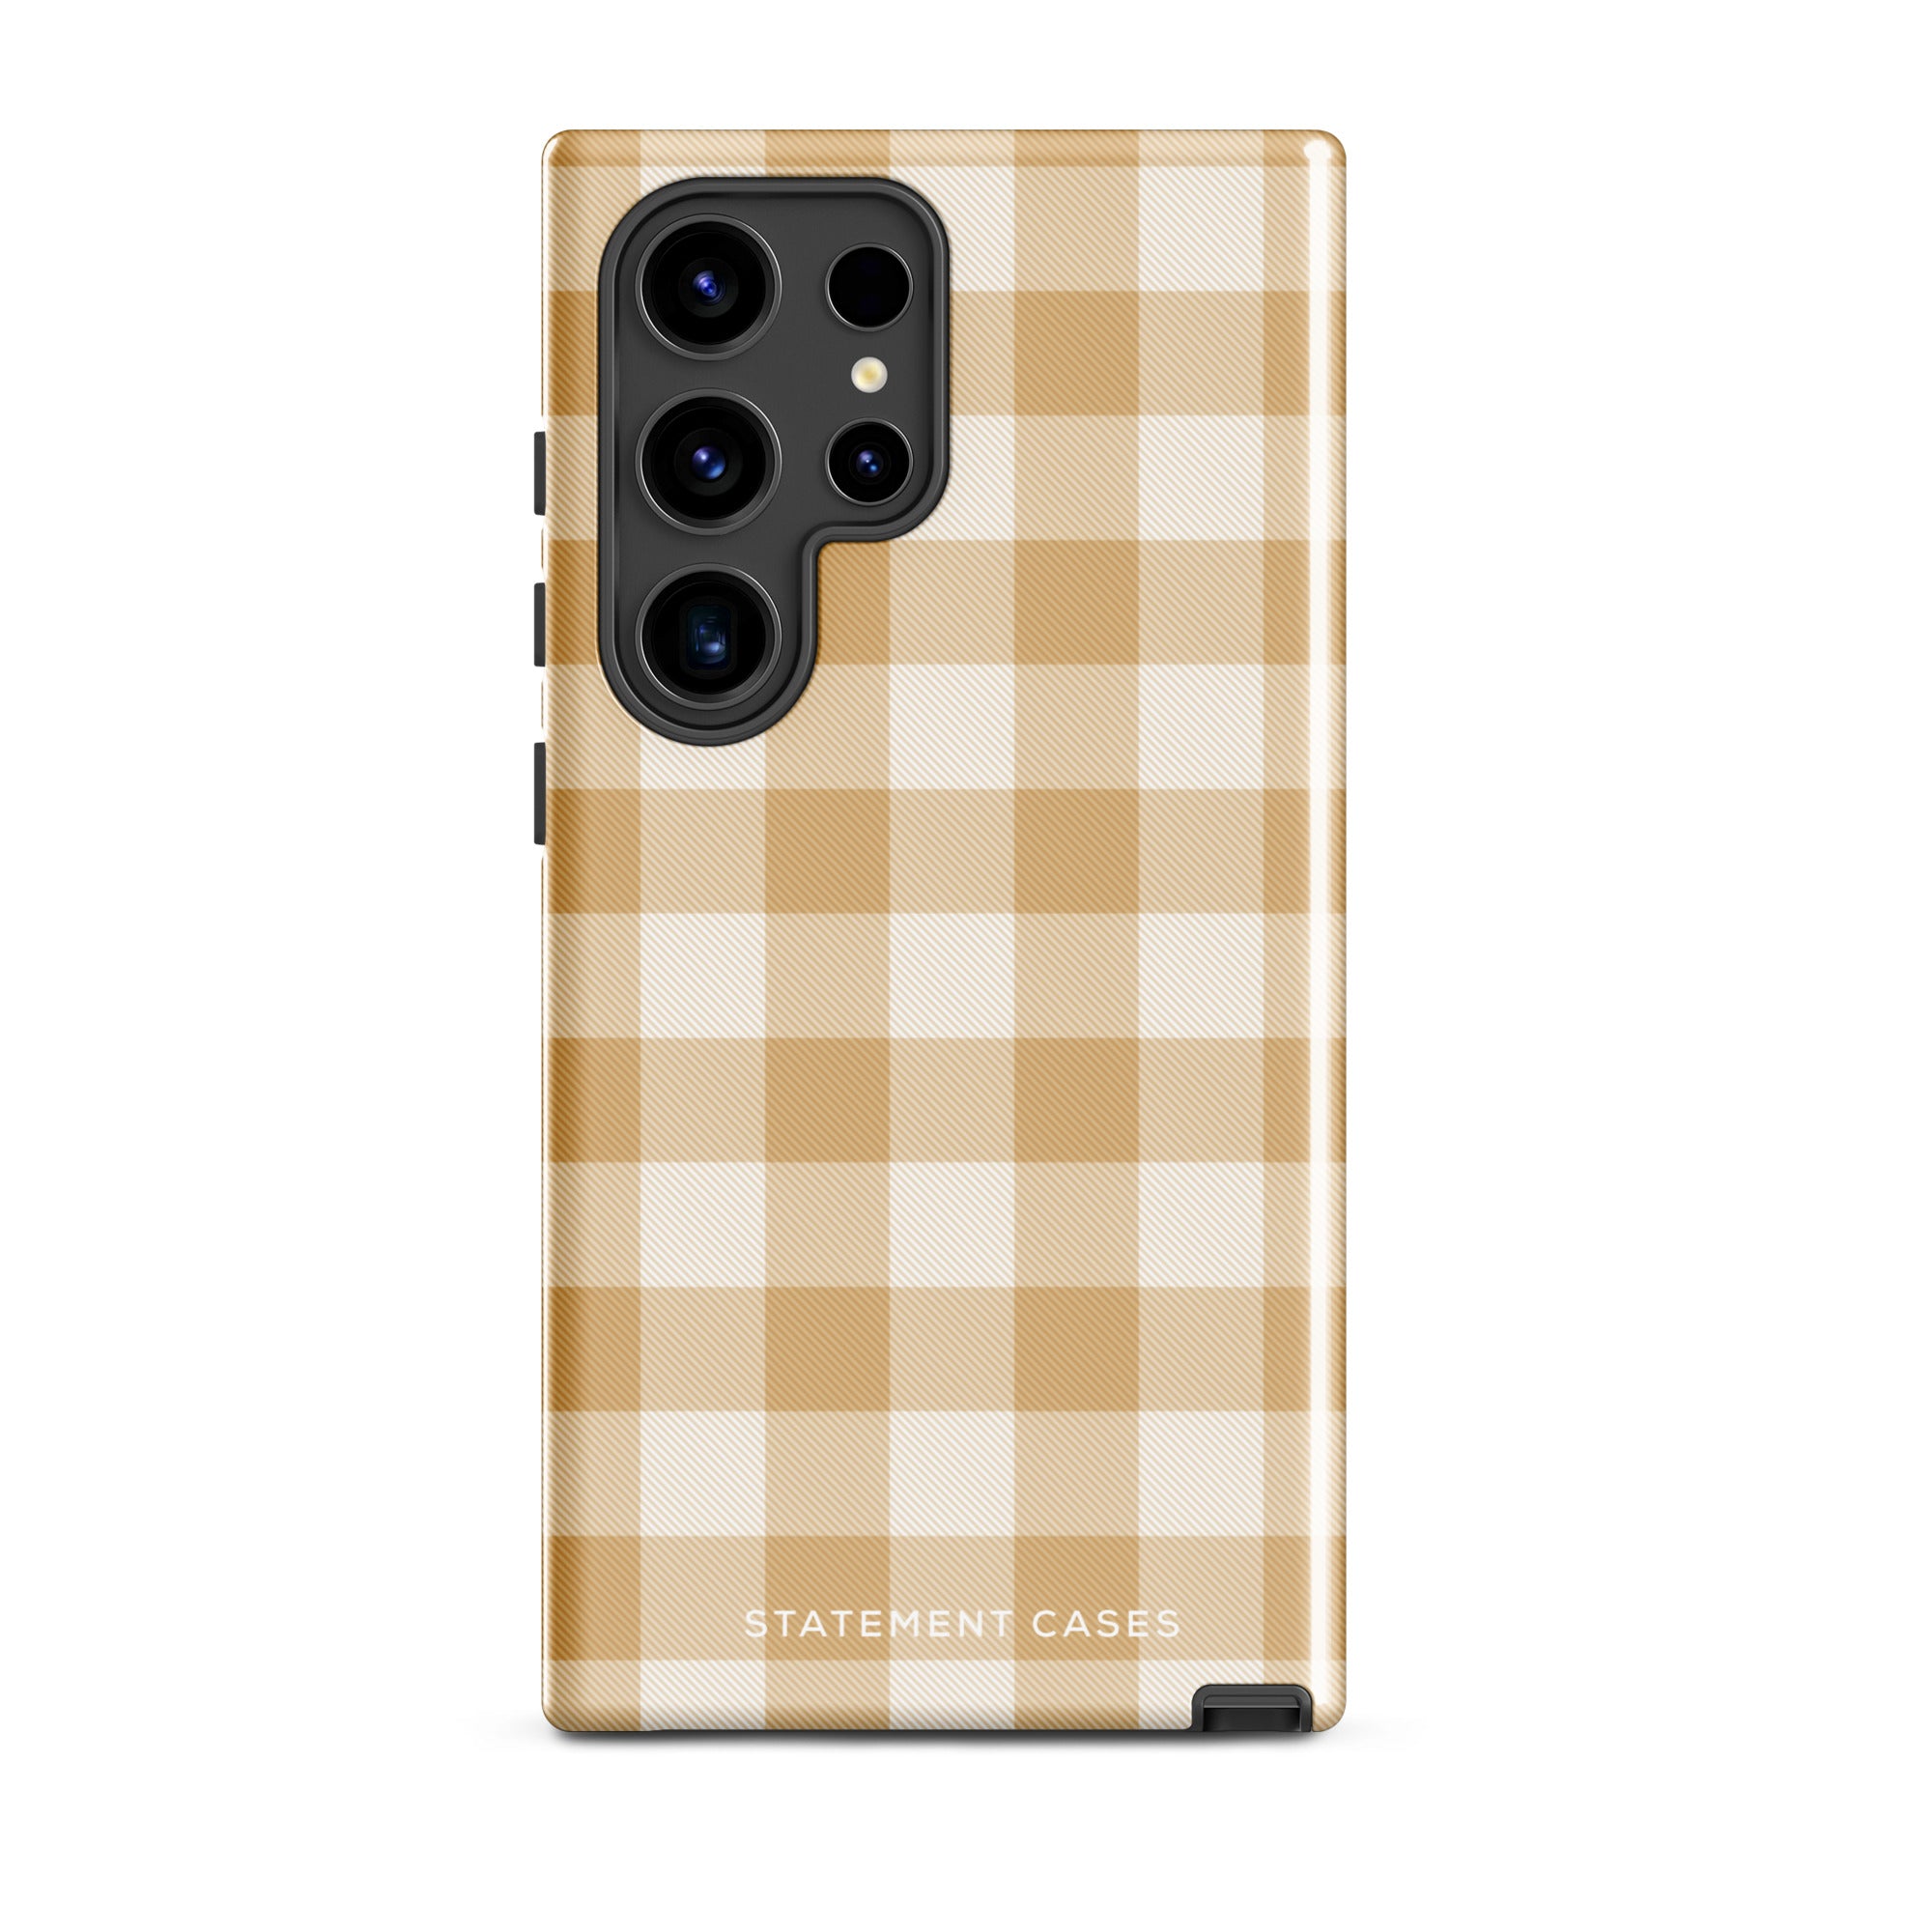 A beige and white checkered phone case is shown. Designed to fit a smartphone with a horizontal dual-camera setup, it features "STATEMENT CASES" printed at the bottom. This impact-resistant phone case offers both style and protection.Product Name: Gingham Grace for Samsung Brand Name: Statement Cases